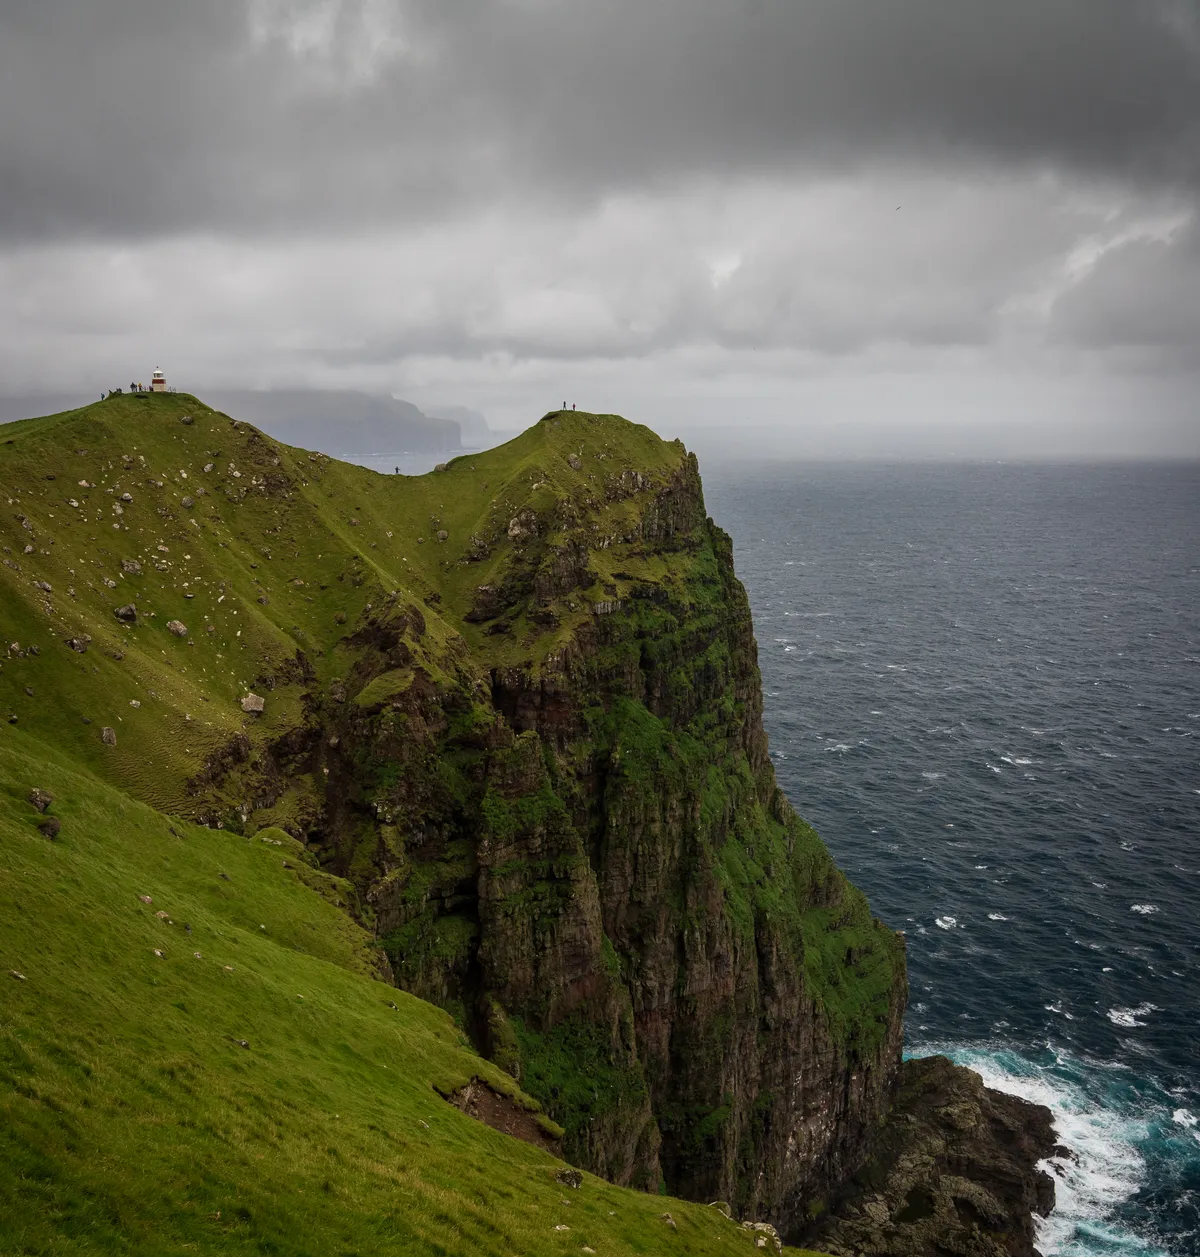 Our hike report for our hike up to Kallur Lighthouse and the spot of James Bond’s demise in No Time To Die!